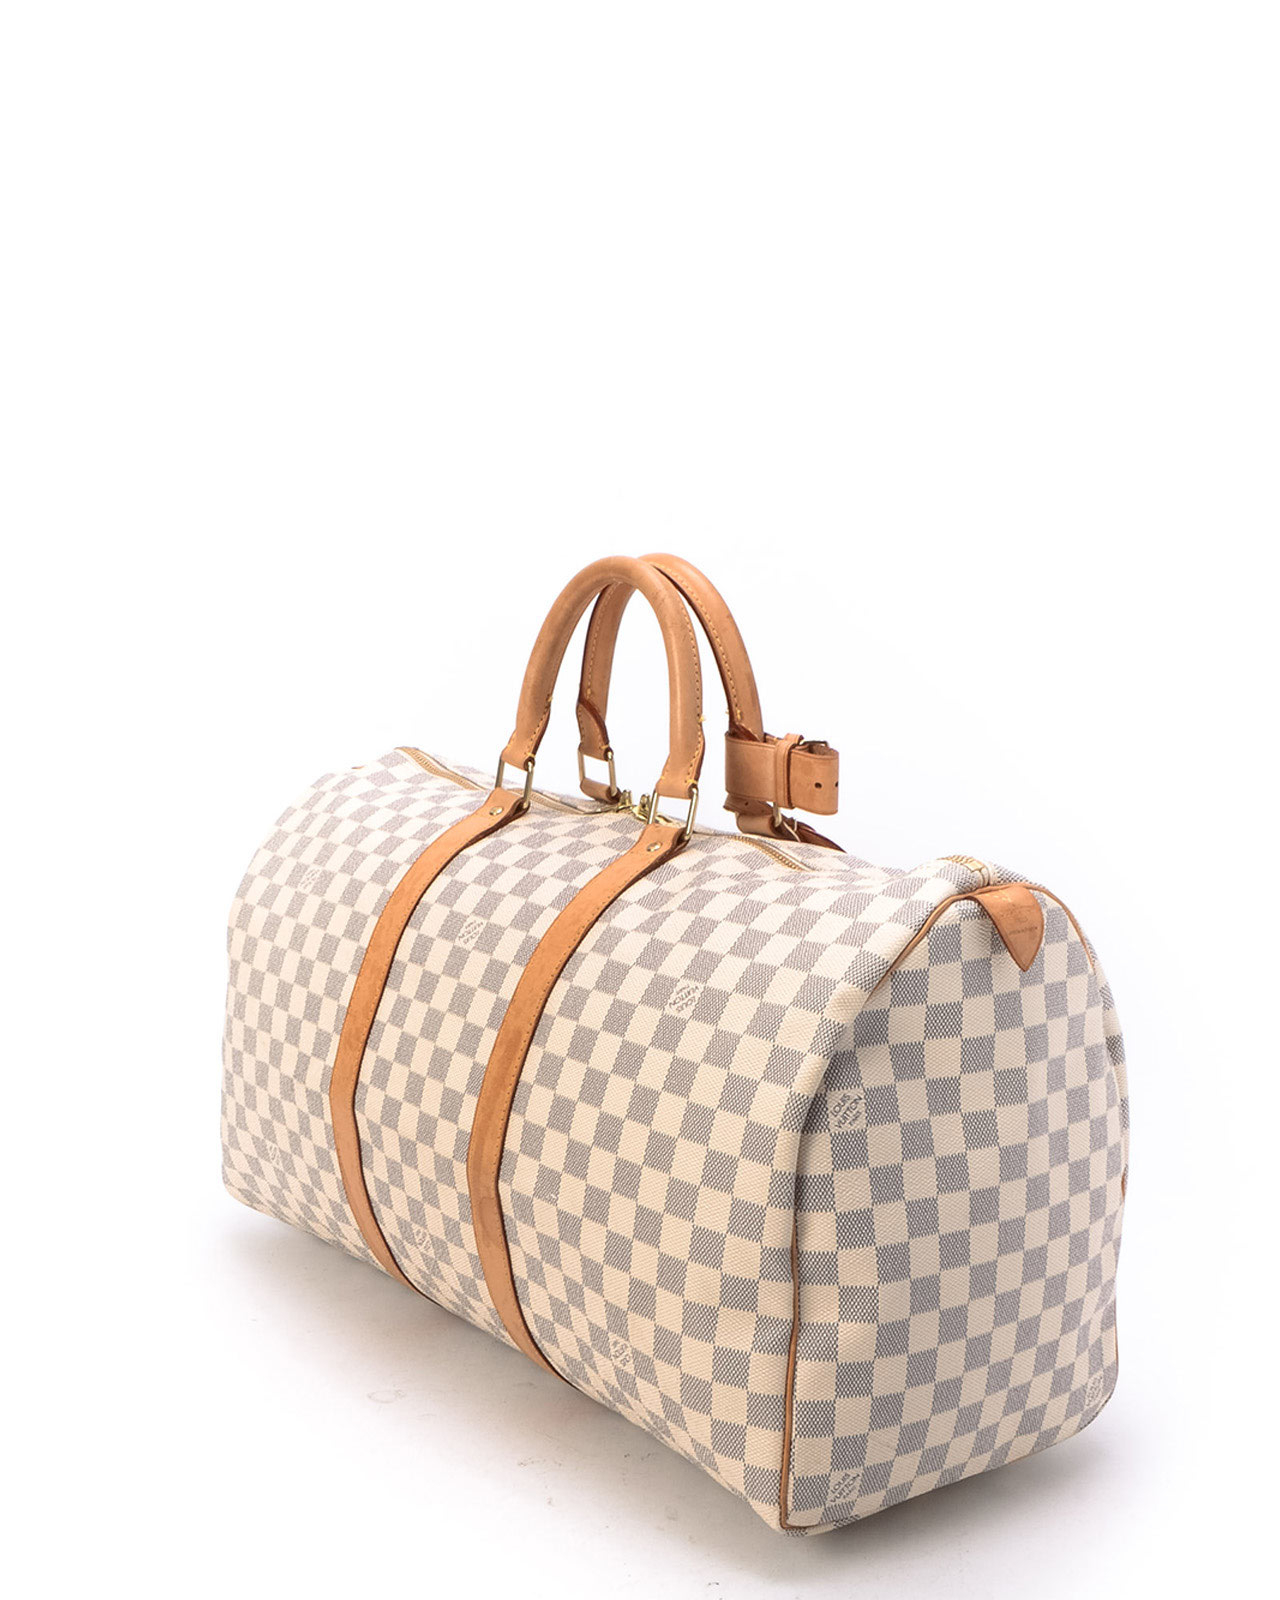 Louis Vuitton Backpack White | Confederated Tribes of the Umatilla Indian Reservation